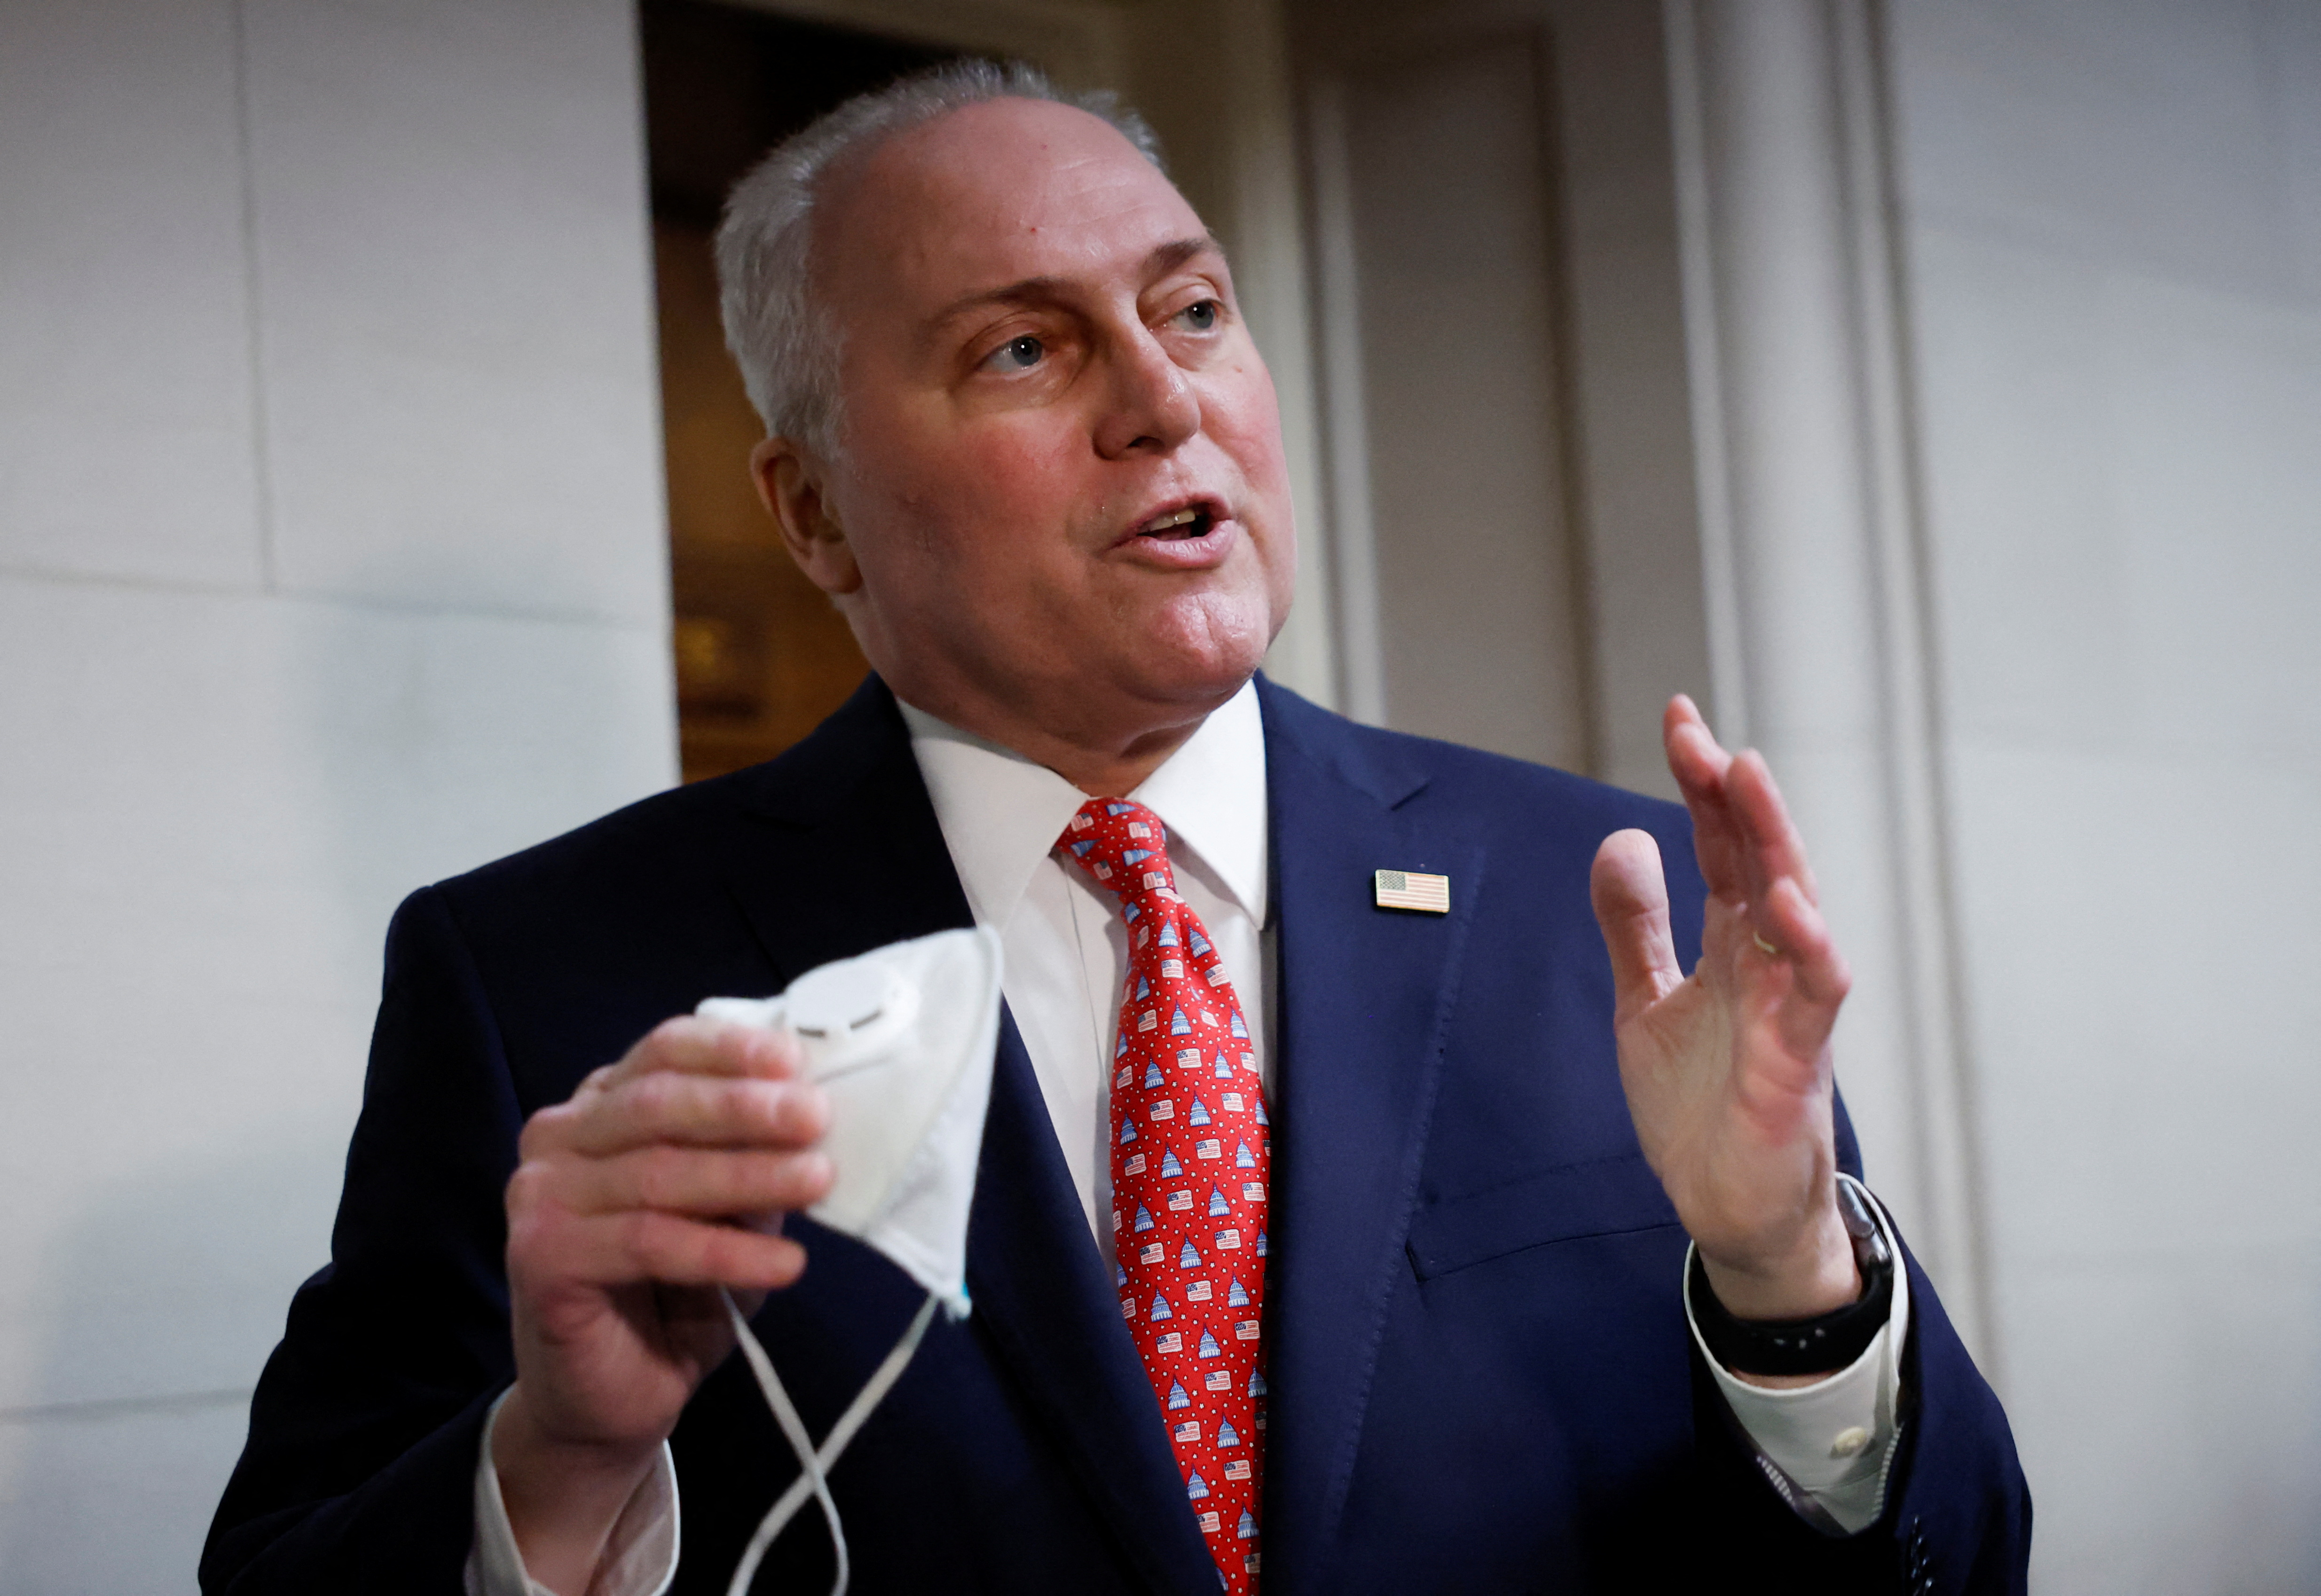 Republicans have chosen Scalise as House speaker, but his path is